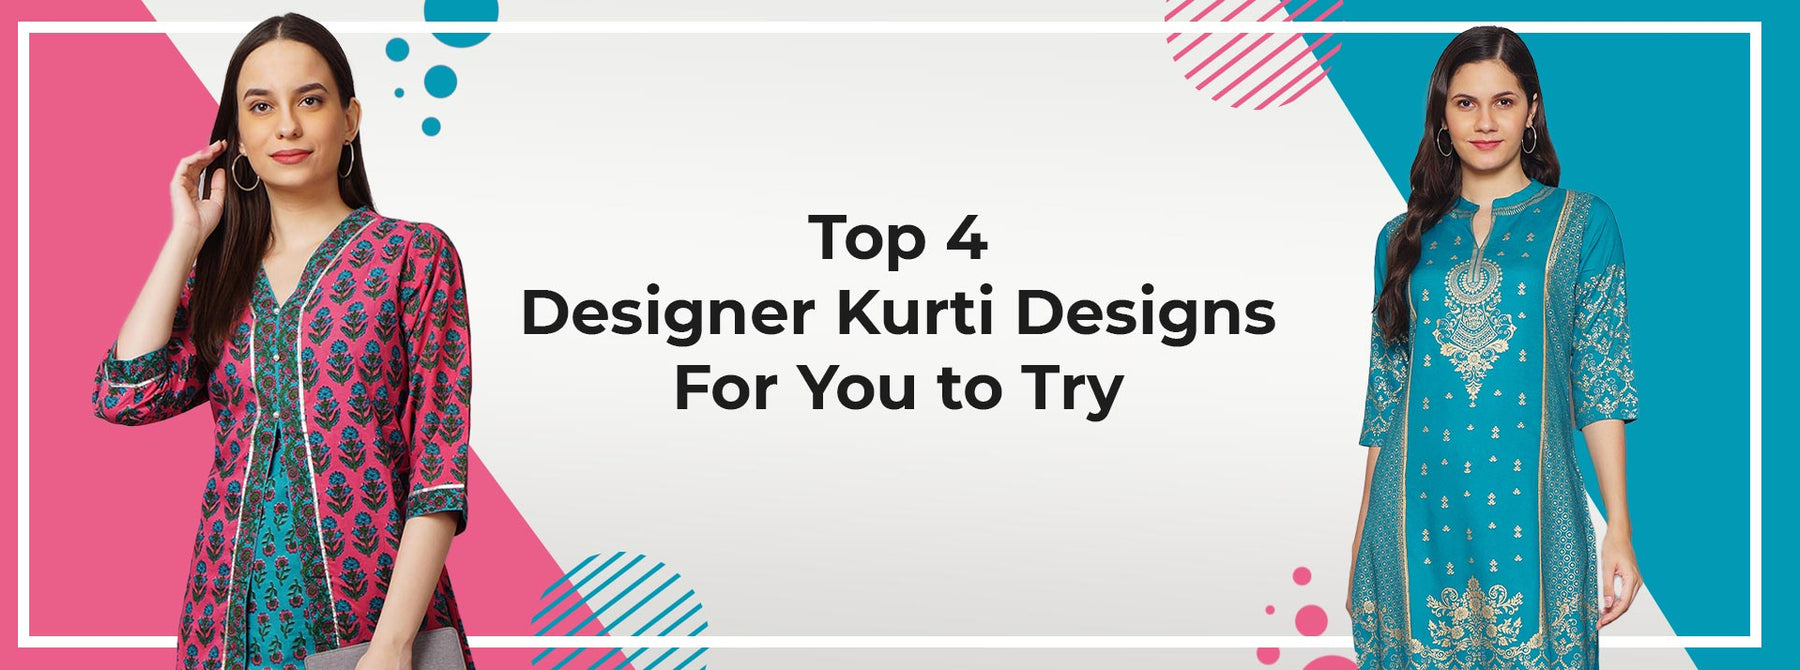 Top 4 Designer Kurti Designs For You to Try